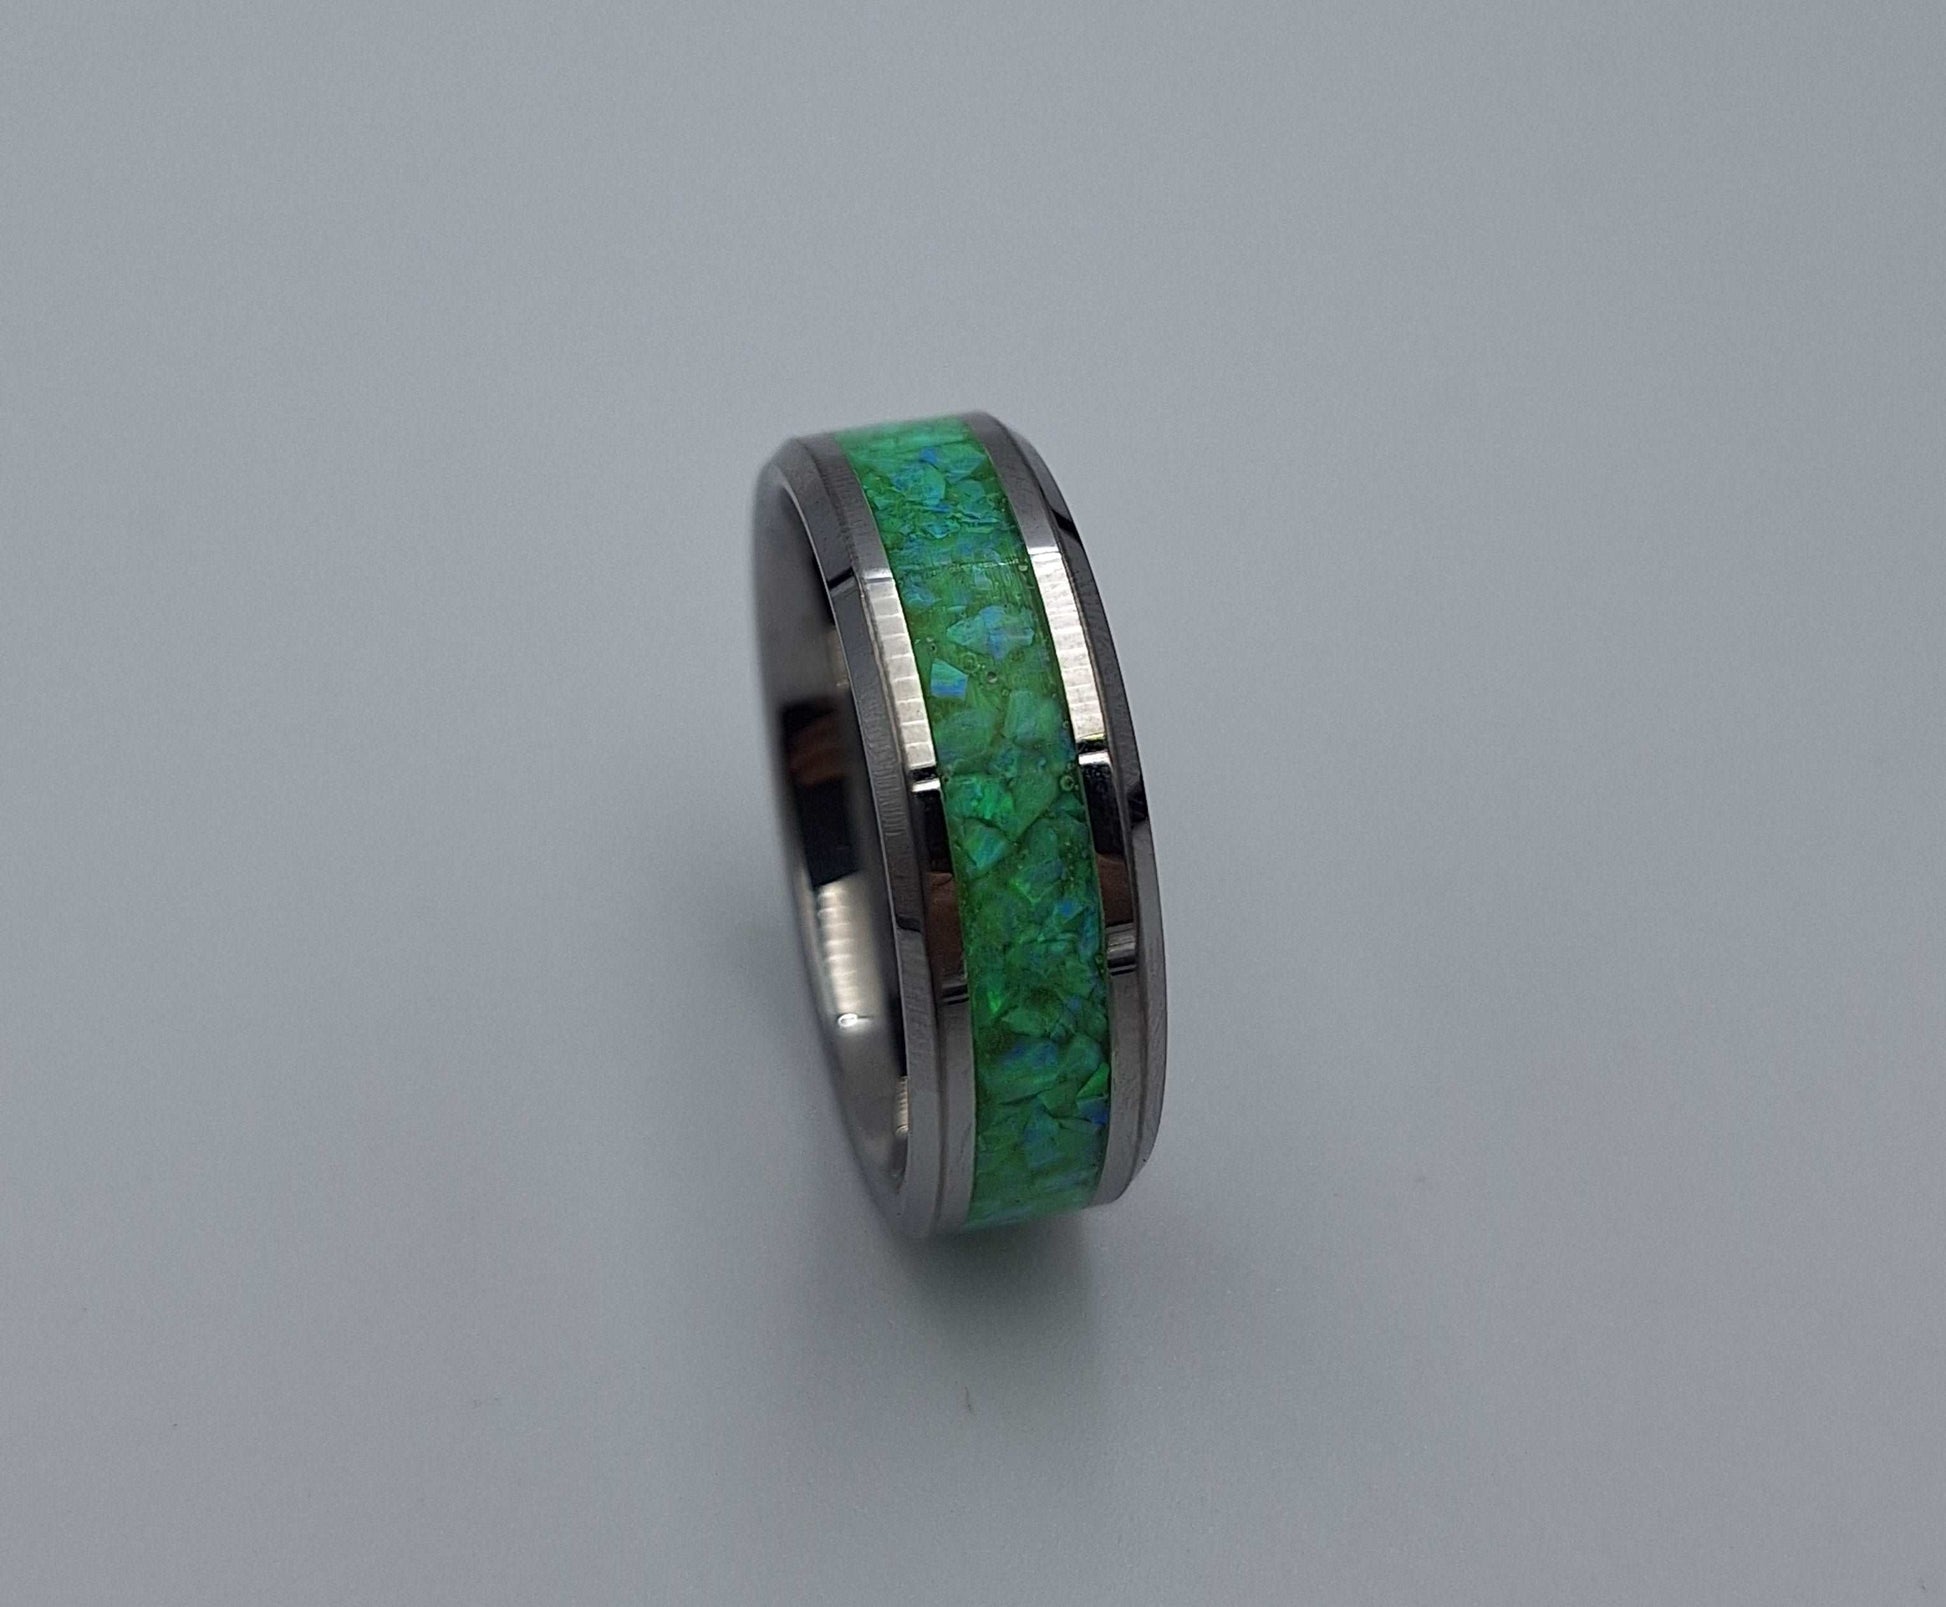 Stainless Steel 8mm Ring With Crushed Opals - Size 13